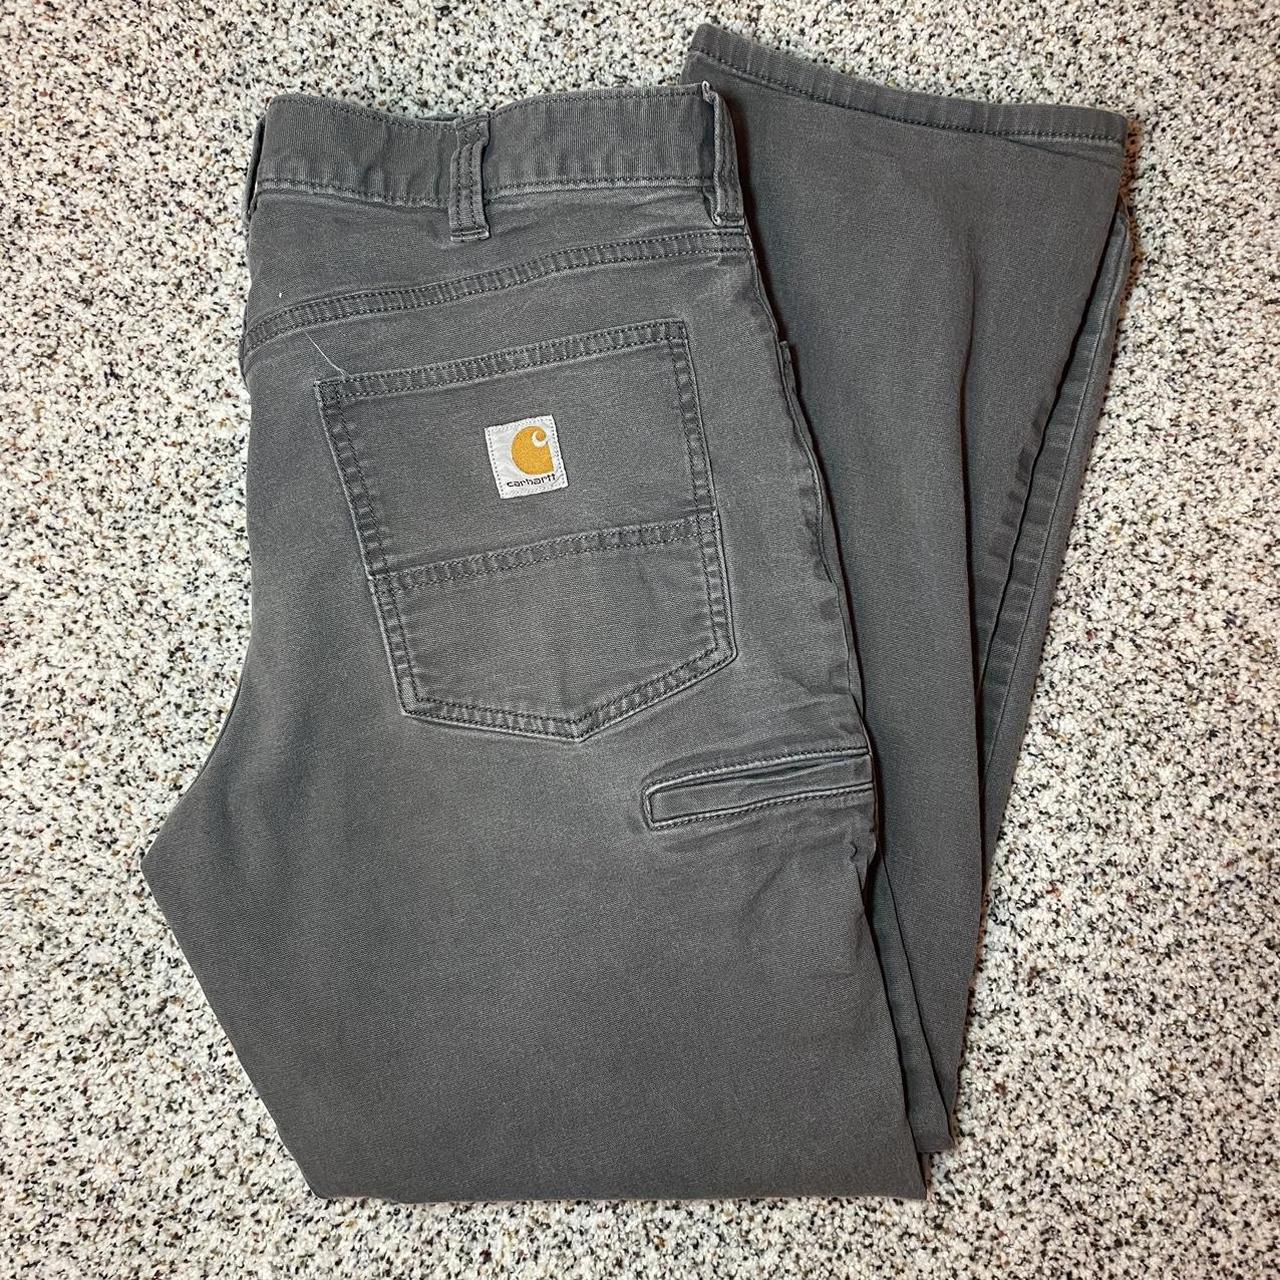 Awesome Grey Vintage Carhartt Jeans! Great... - Depop